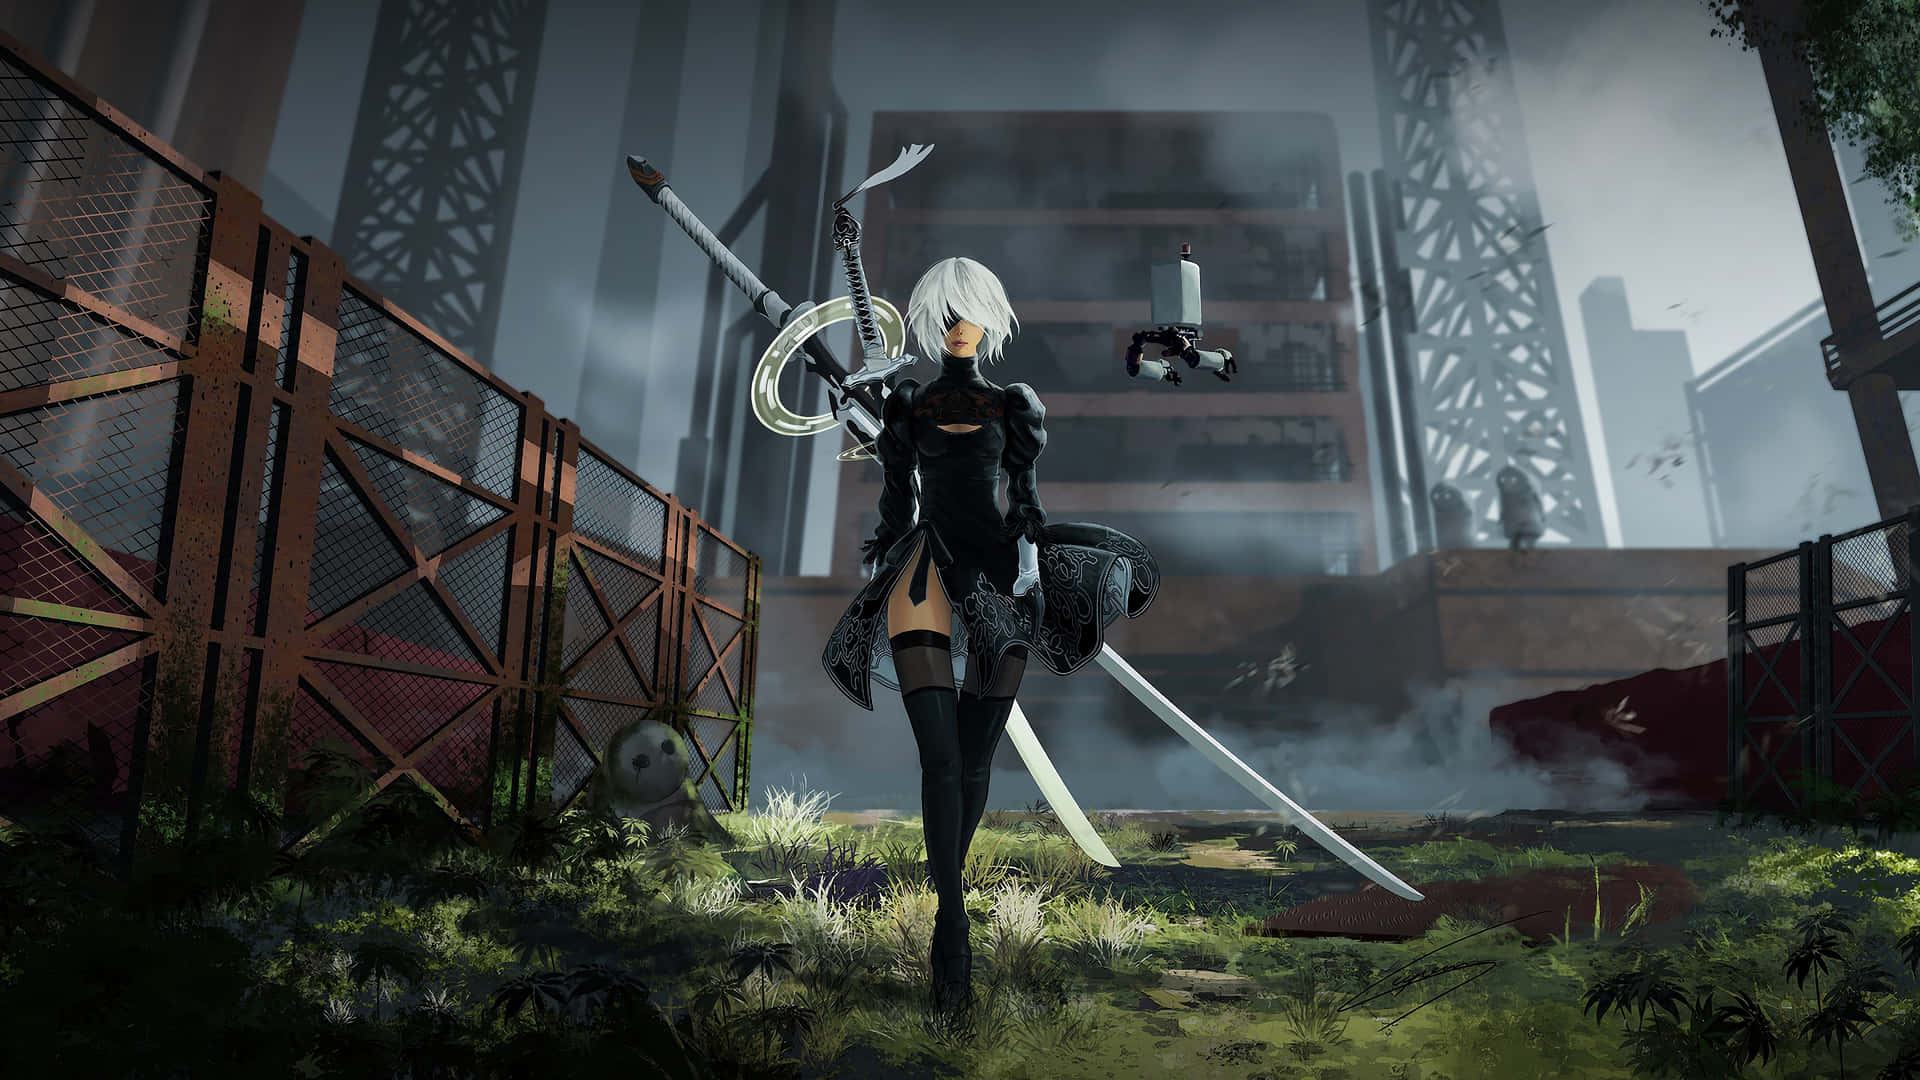 (referring To A Computer Or Mobile Wallpaper Related To A Game Or Movie Featuring The Character 2b As The Last Hope Of Humanity)